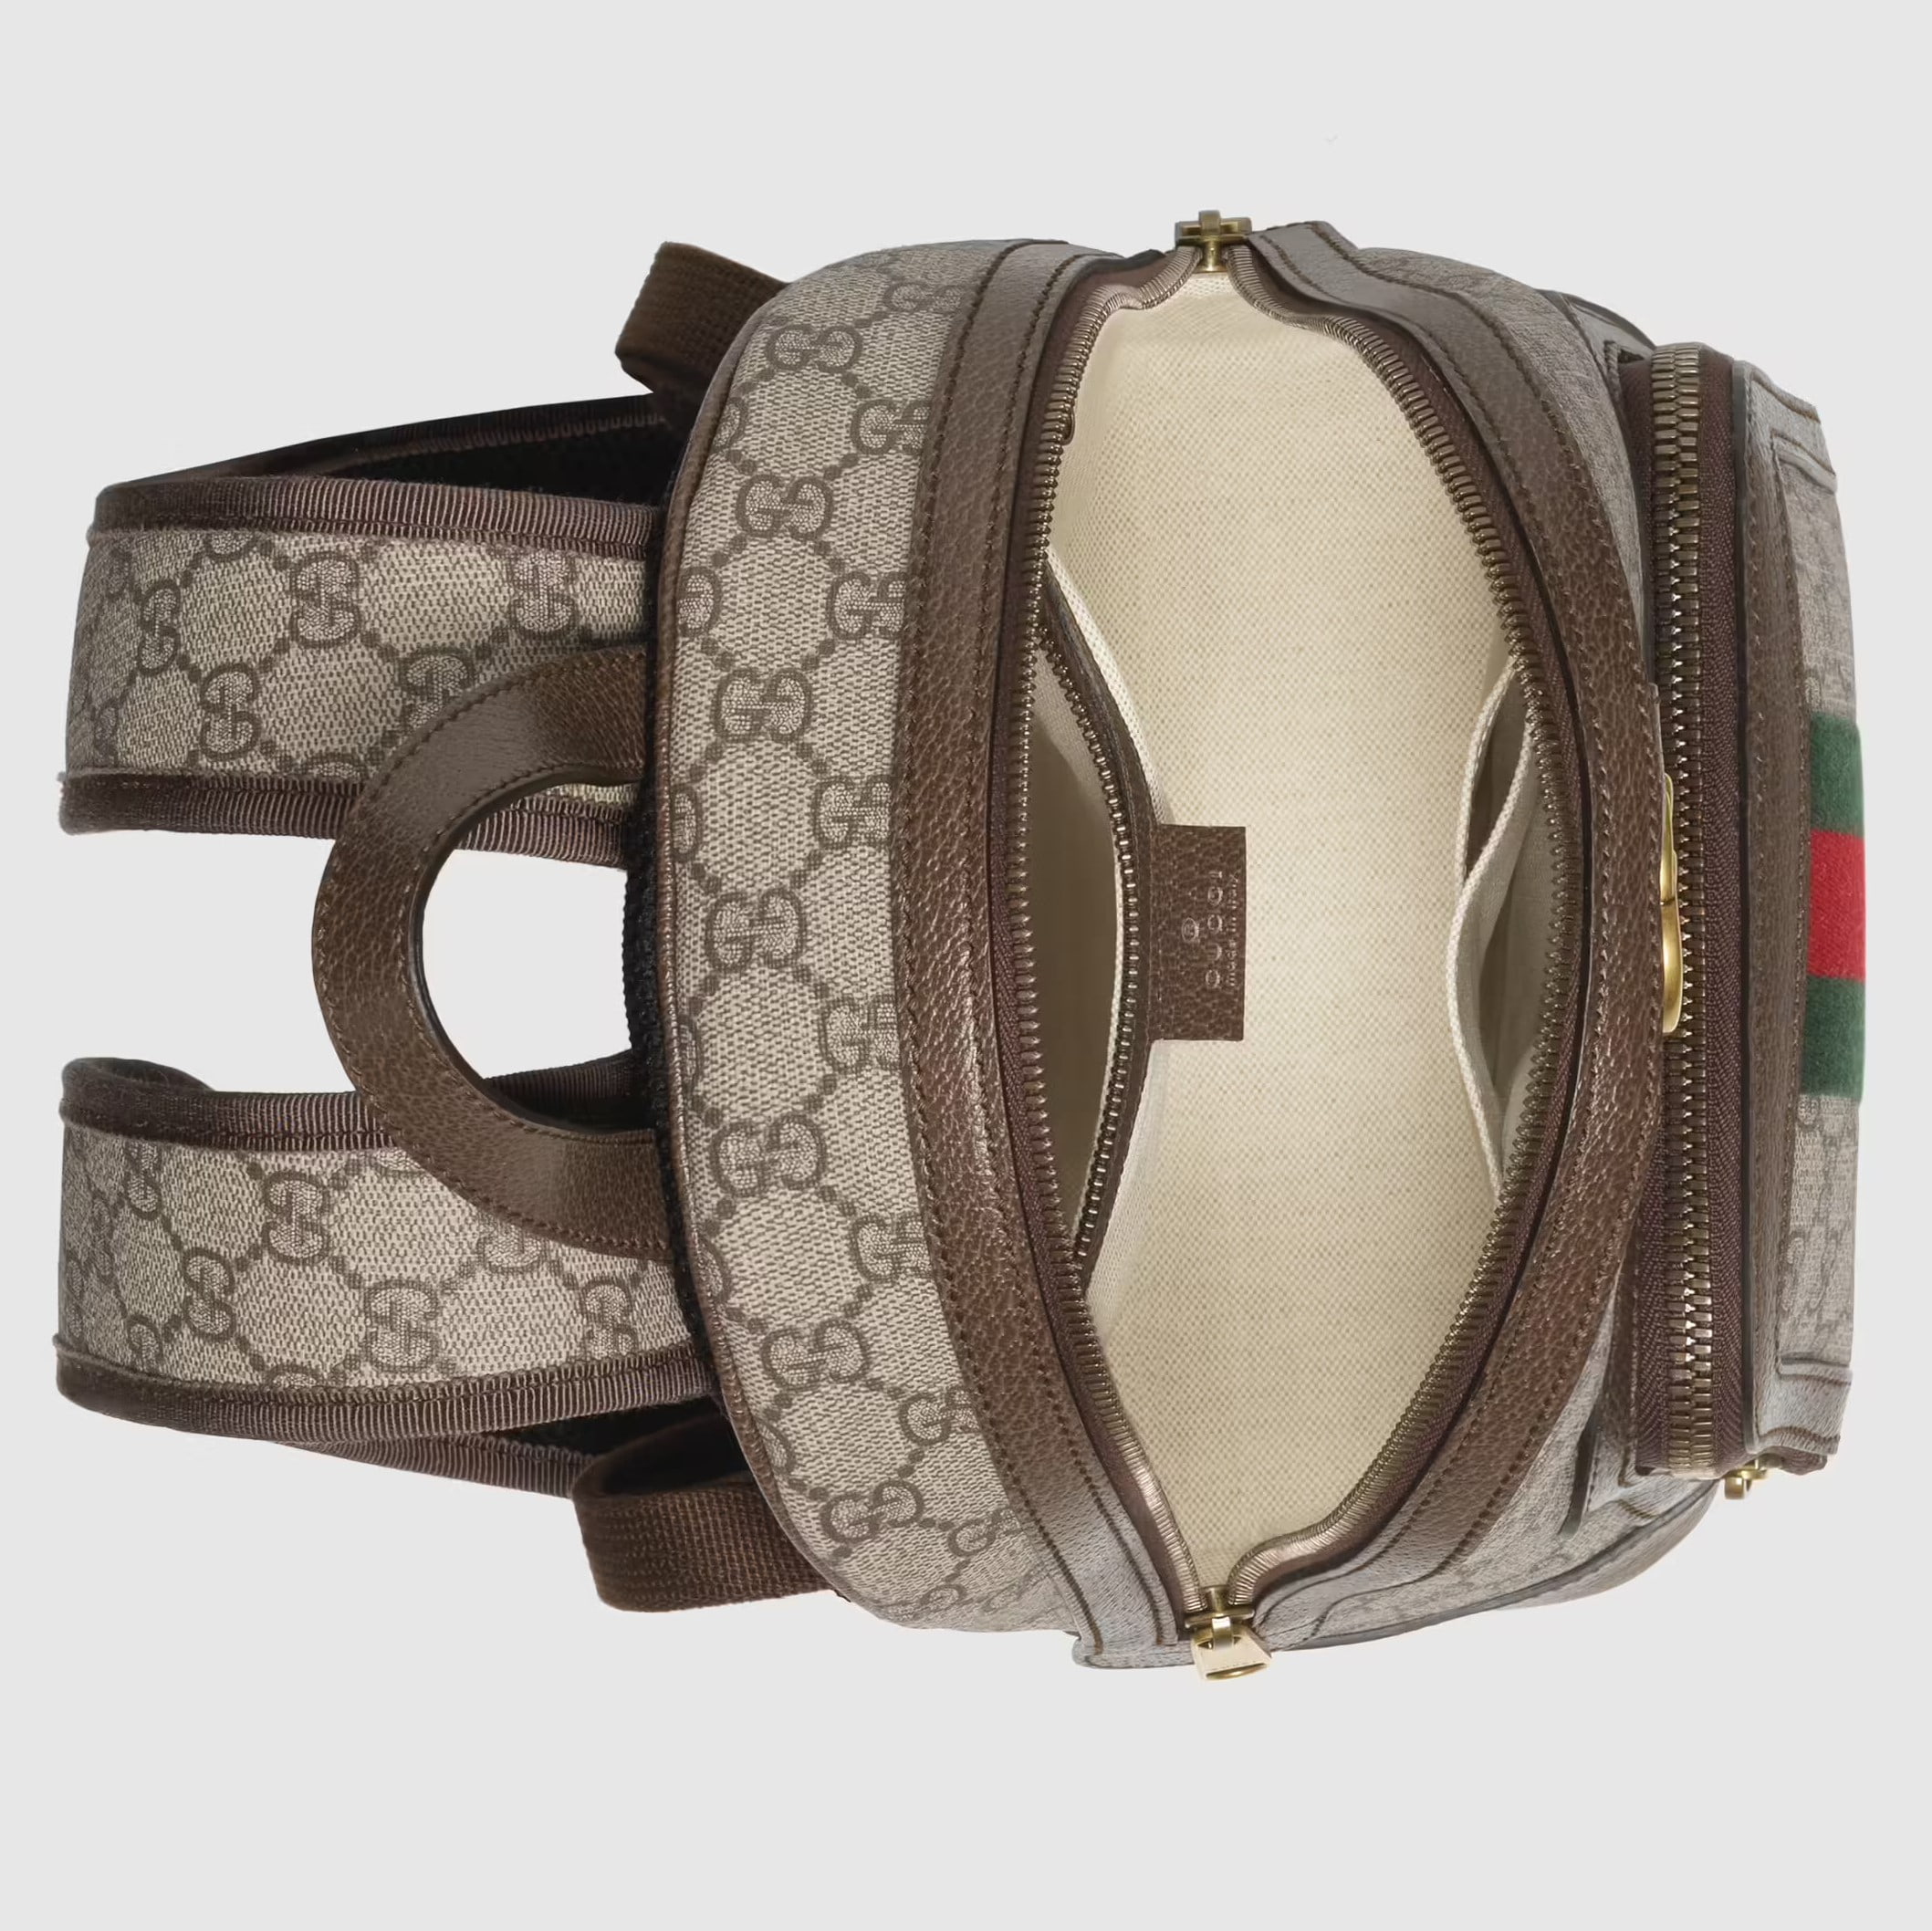 BALO UNISEX GUCCI OPHIDIA GG SMALL BACKPACK 11